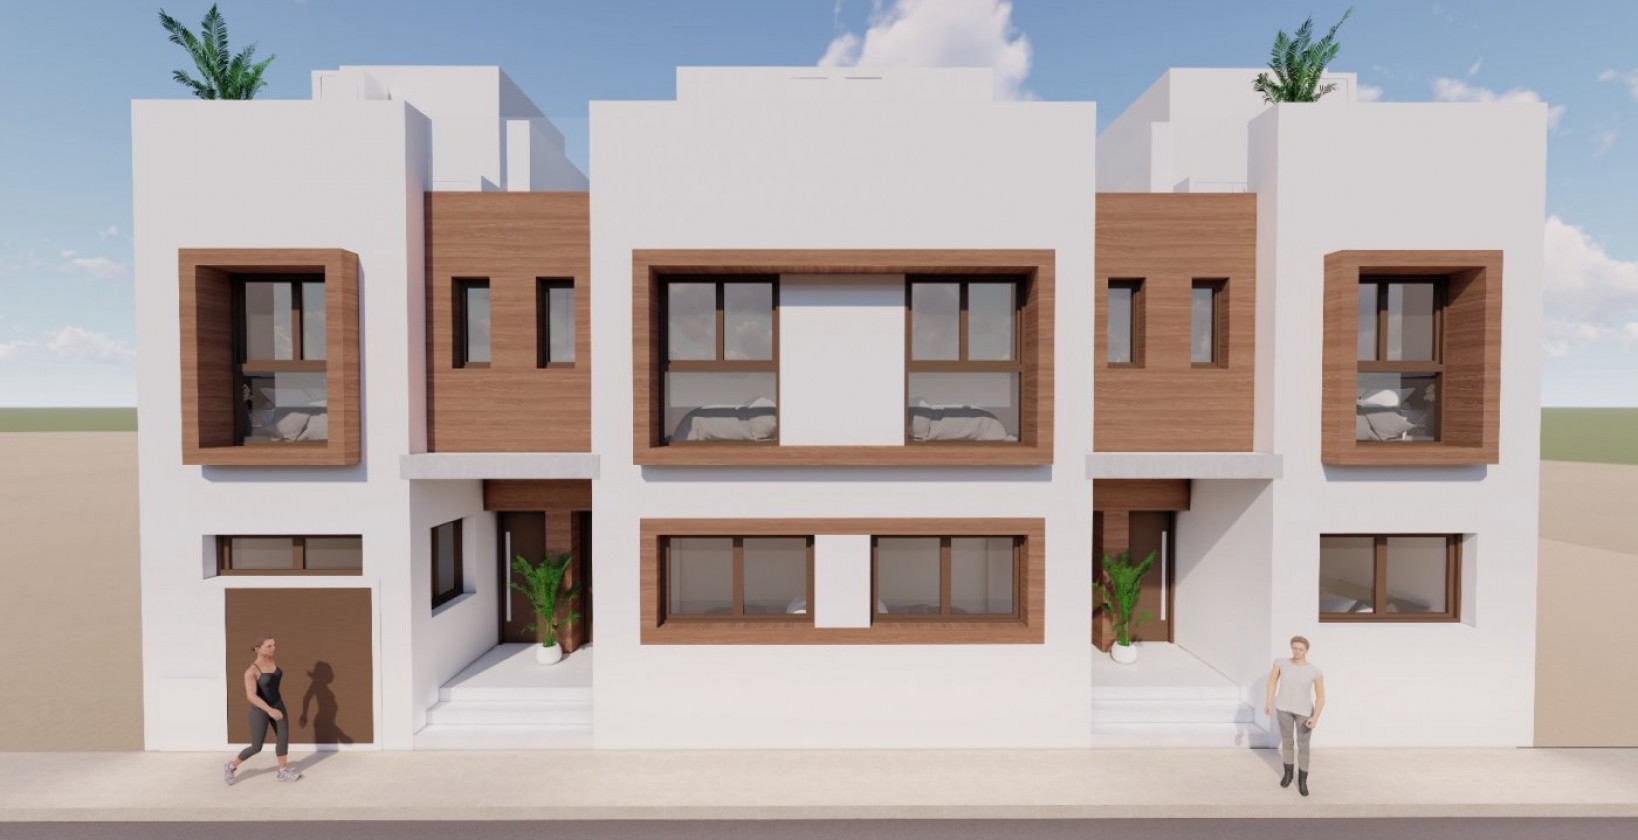 New Build - Town House - San Javier